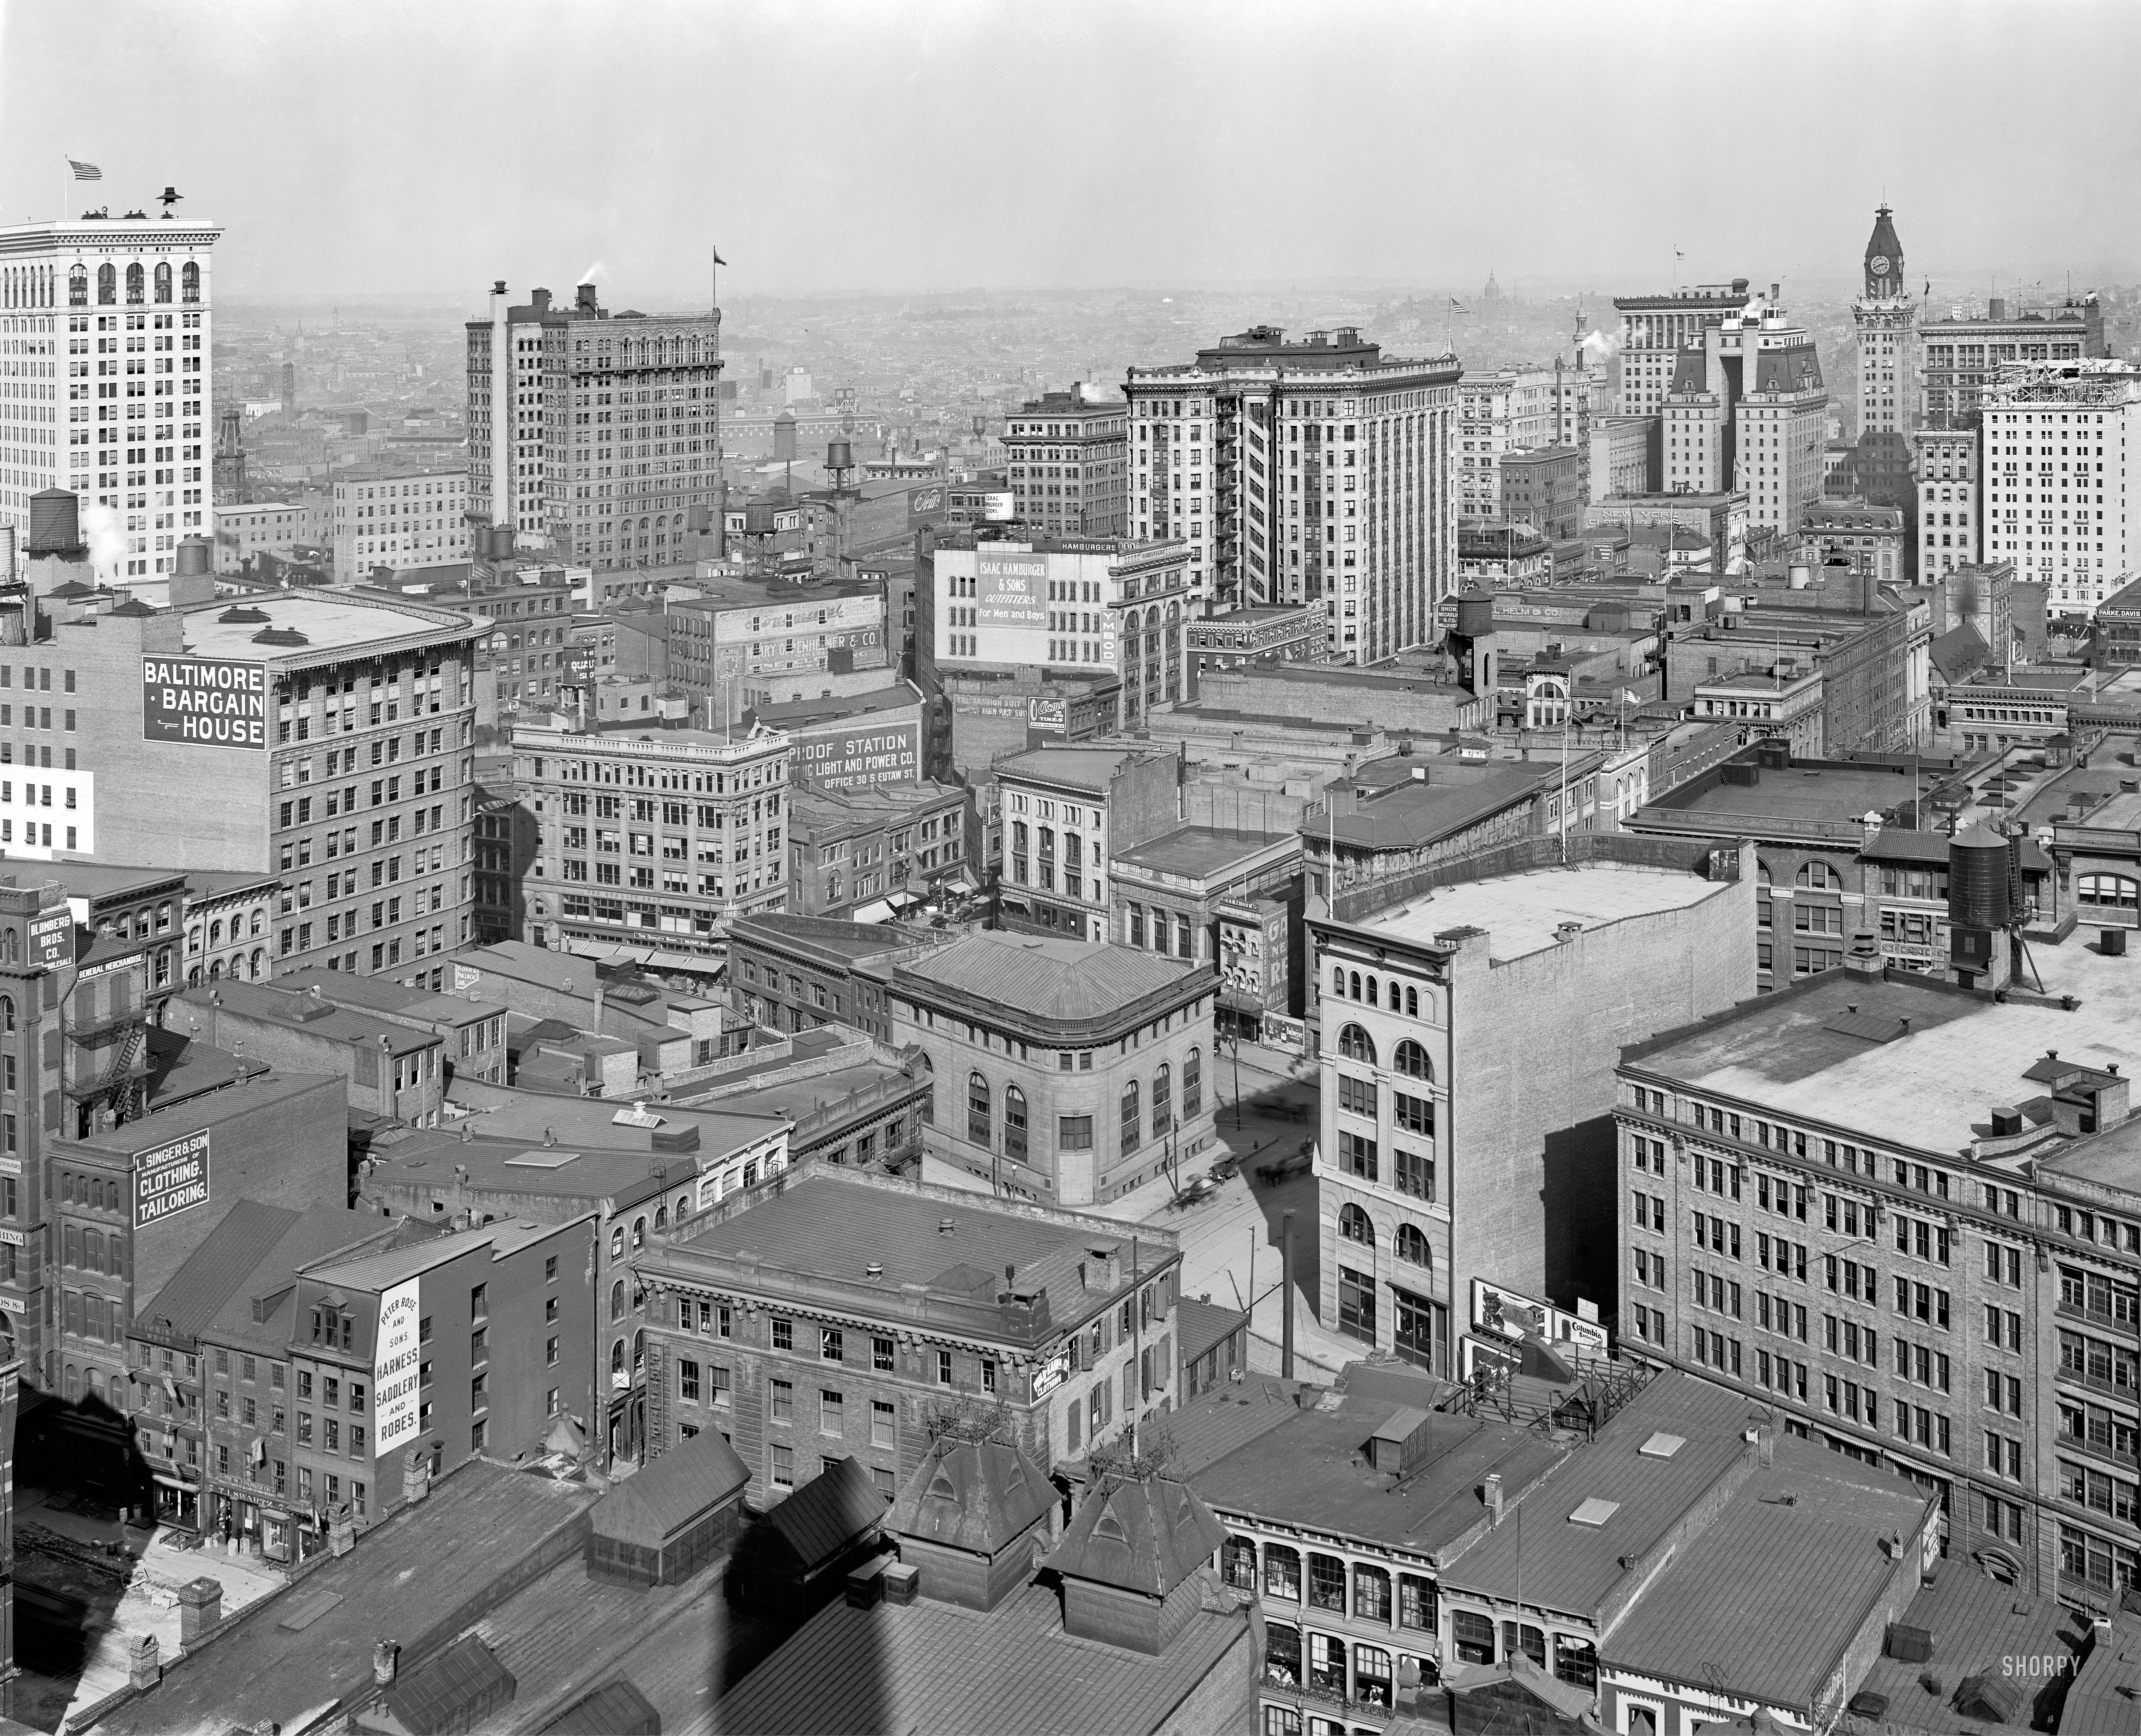 Circa 1912. "Baltimore from the Emerson tower." 8x10 inch dry plate glass negative, Detroit Publishing Company. View full size.